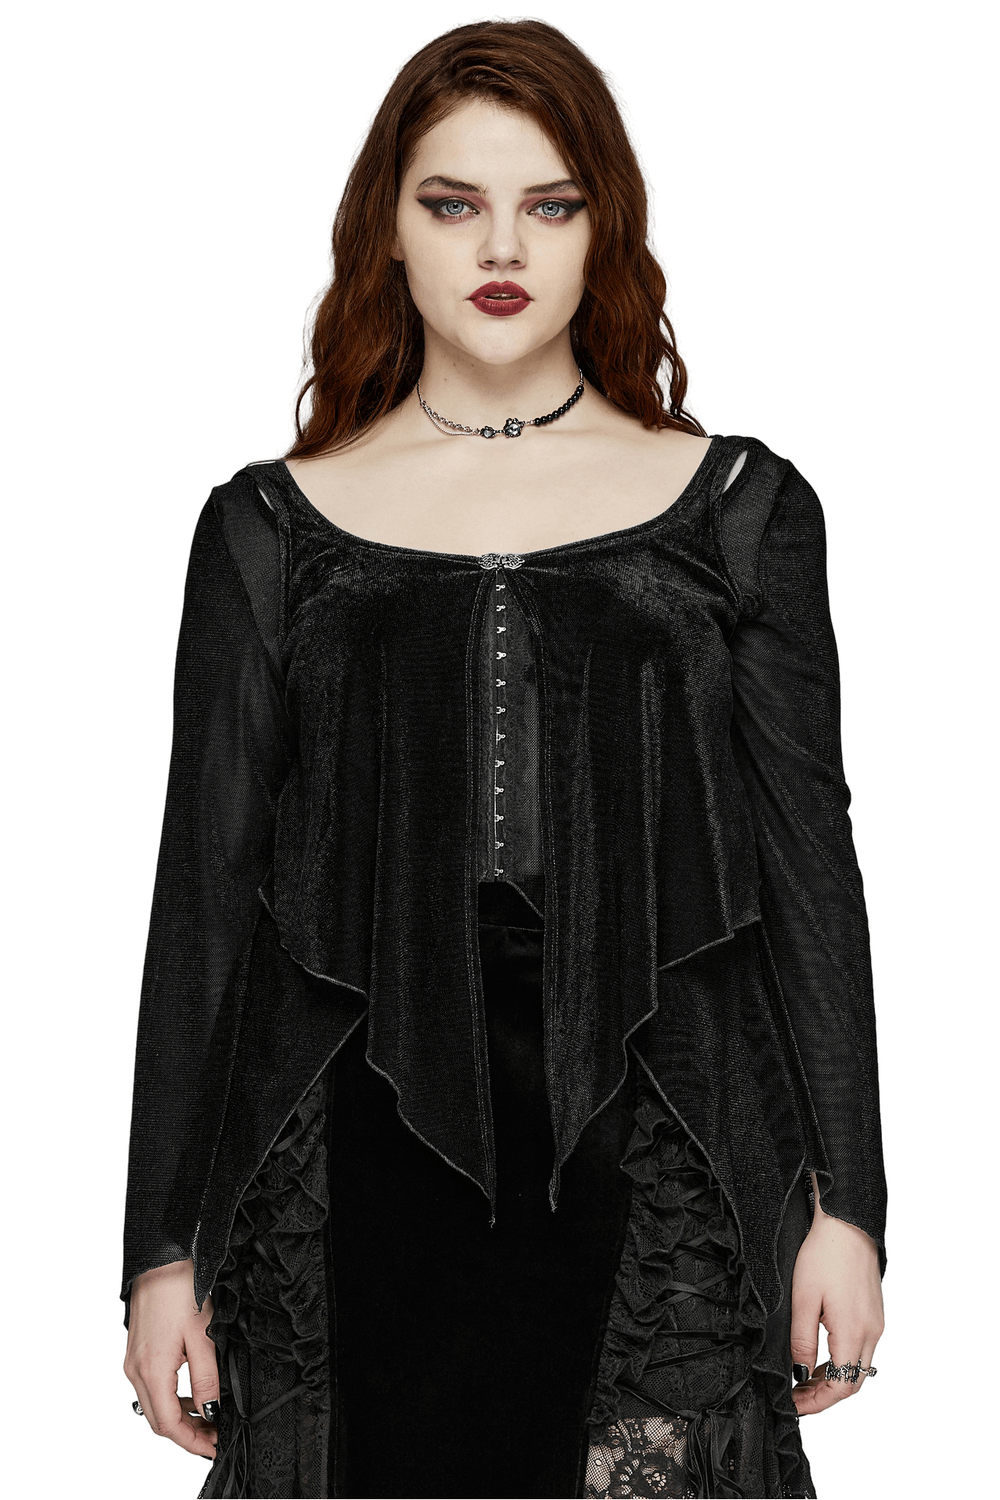 Black Women's Top with Bell Sleeves and Hook Closures